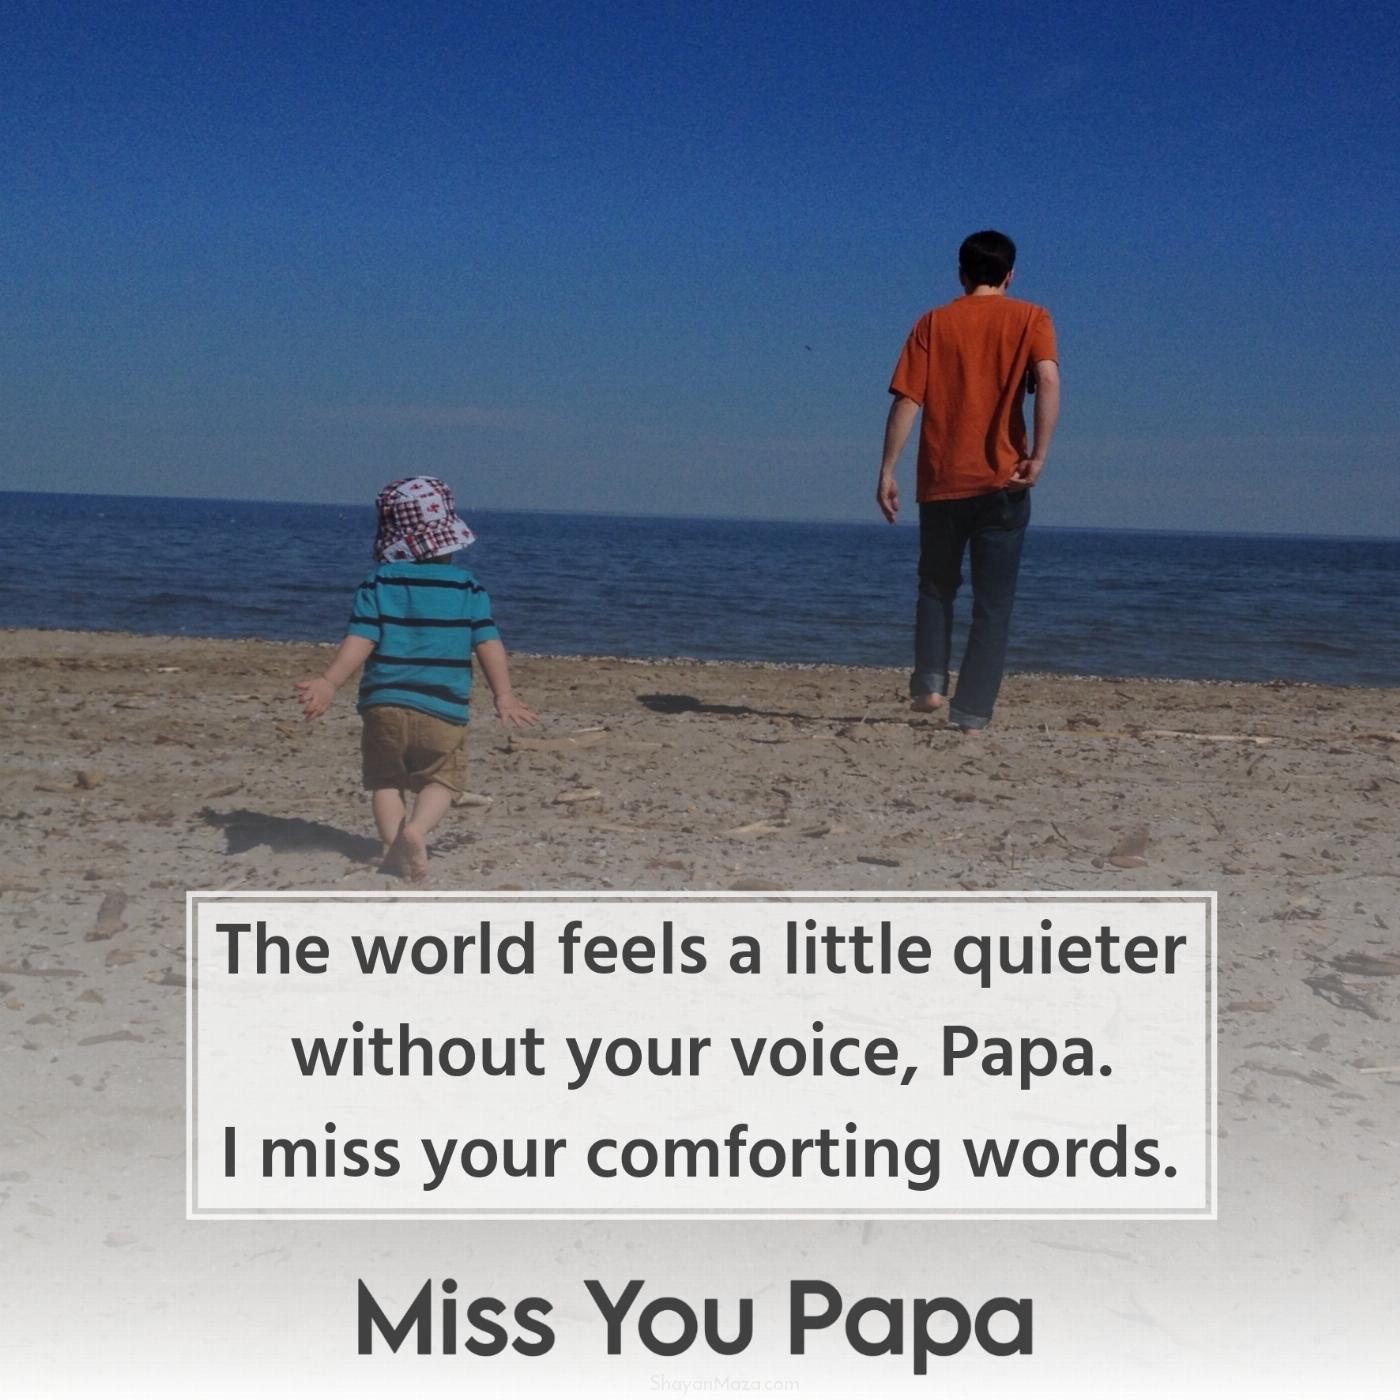 The world feels a little quieter without your voice Papa